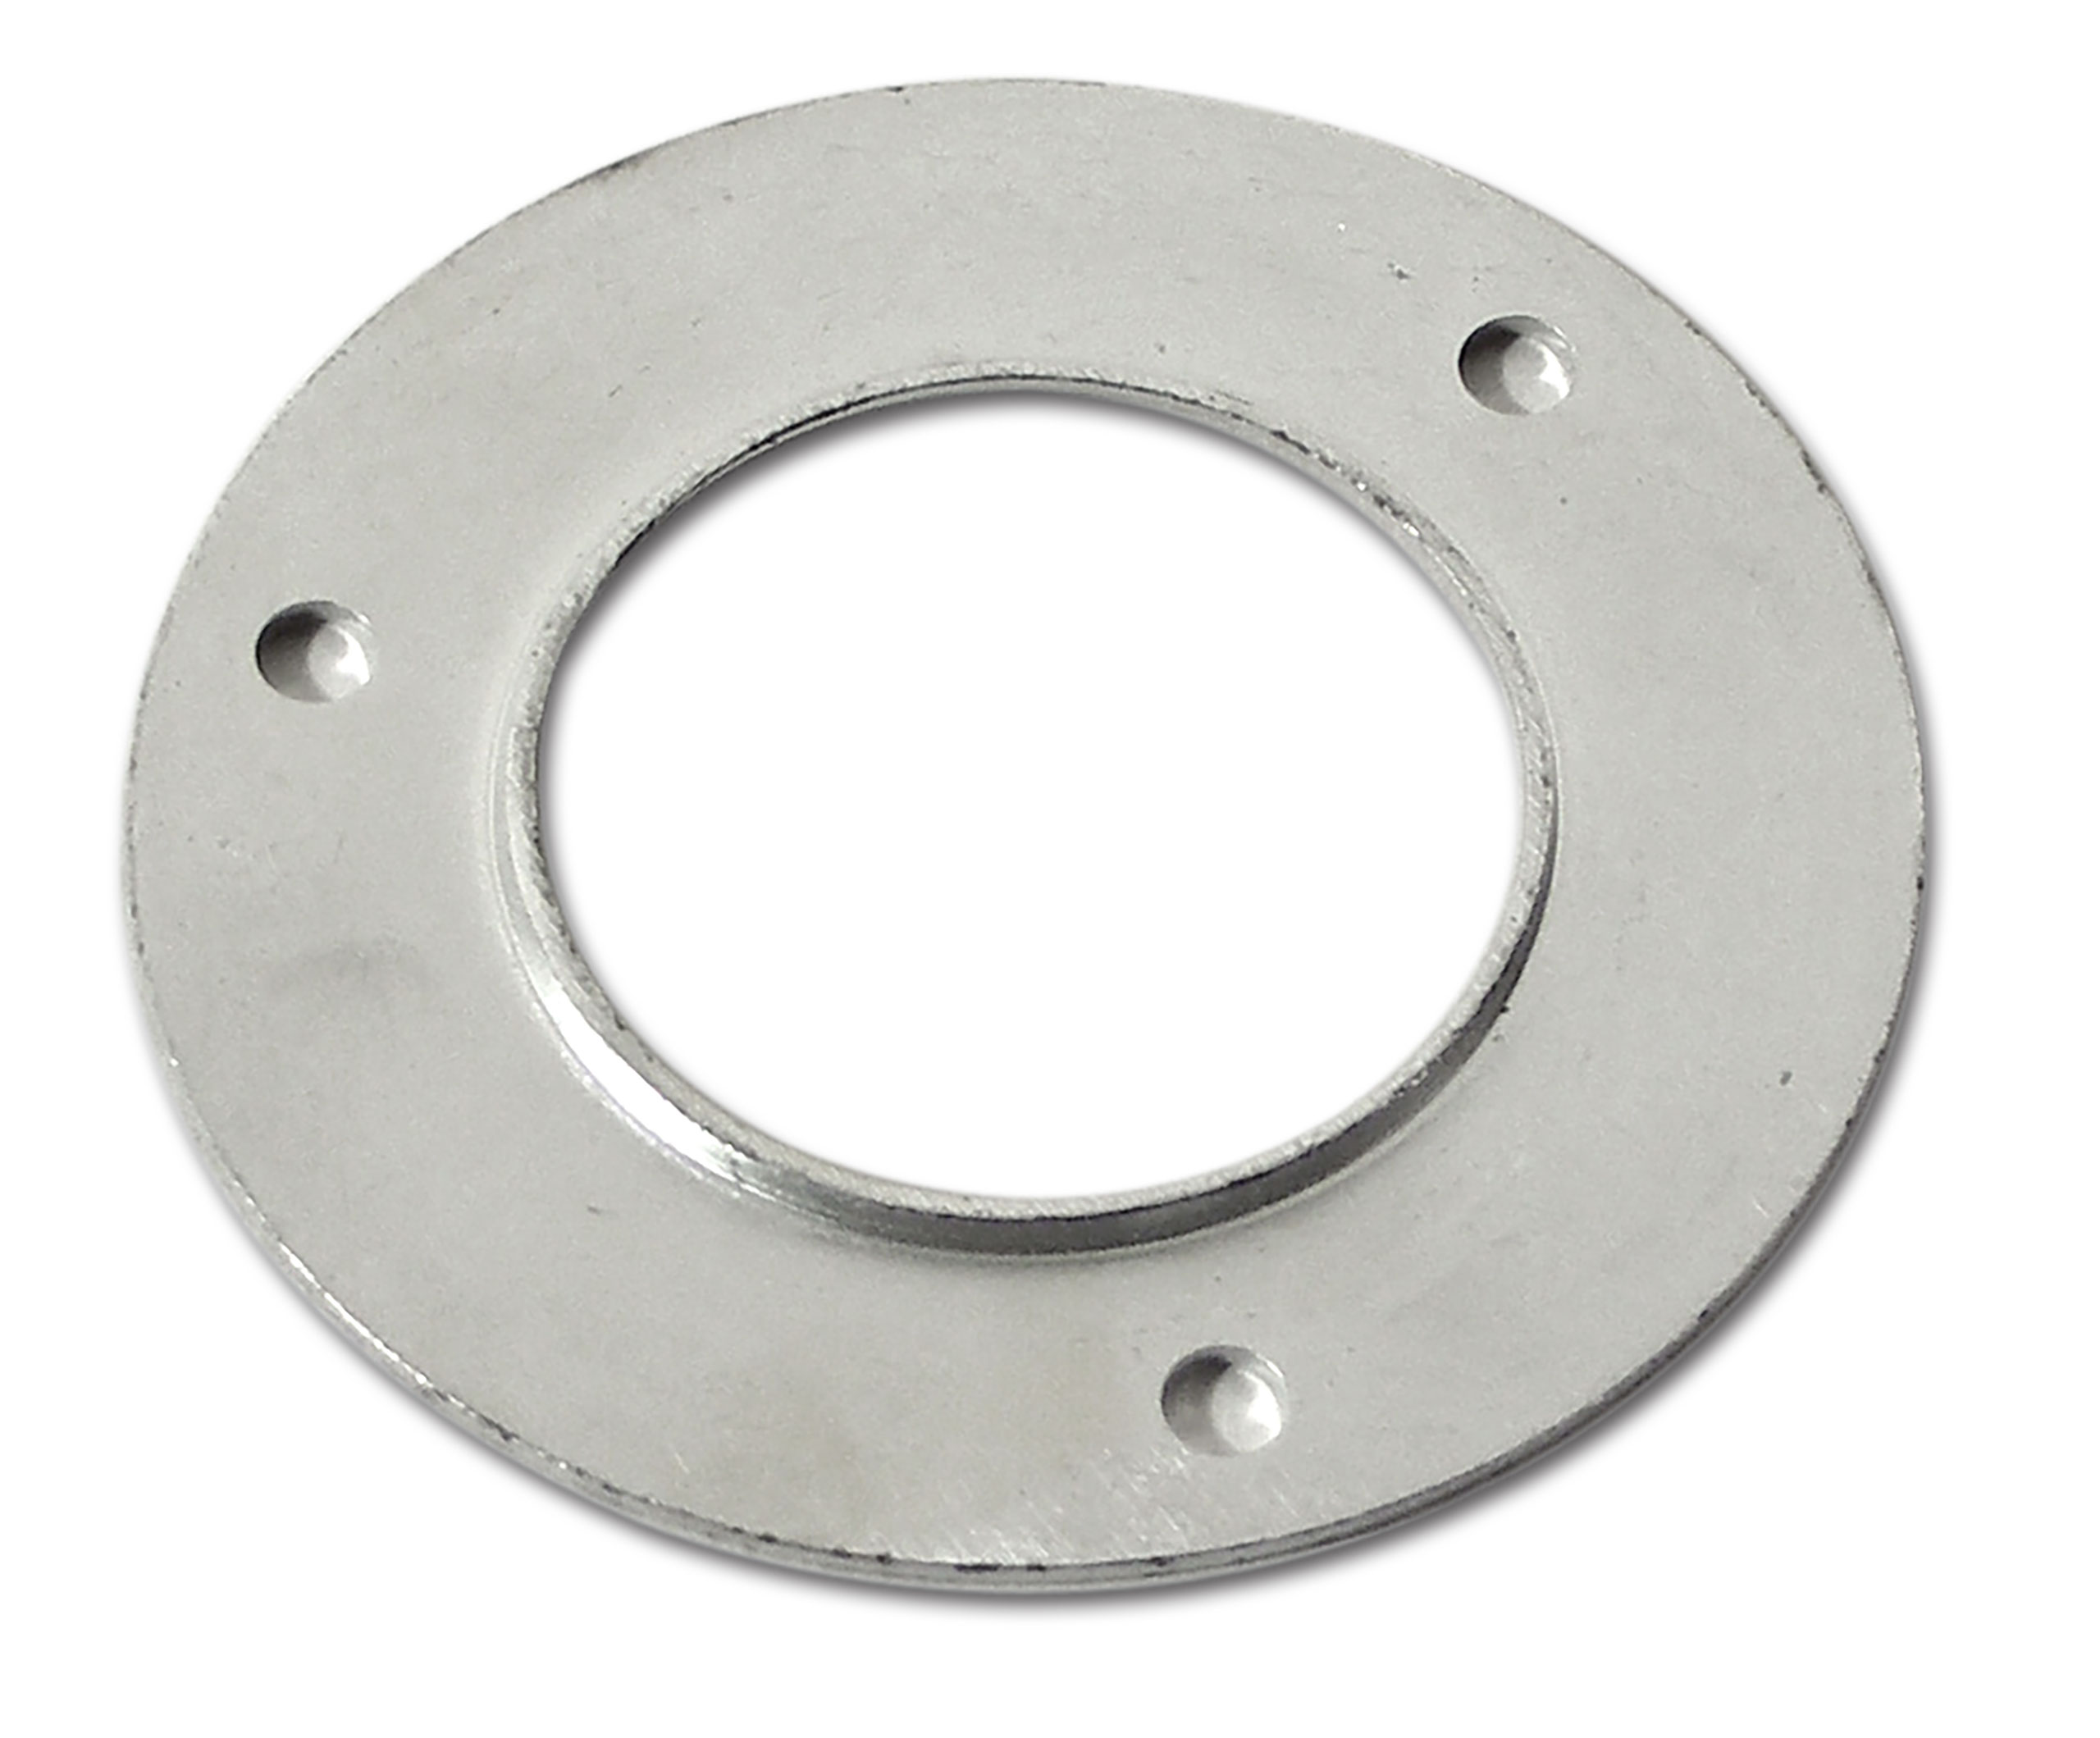 C2 1966 Chevrolet Corvette Hubcap Spinner Reinforcement. 4 Required - Auto Accessories of America